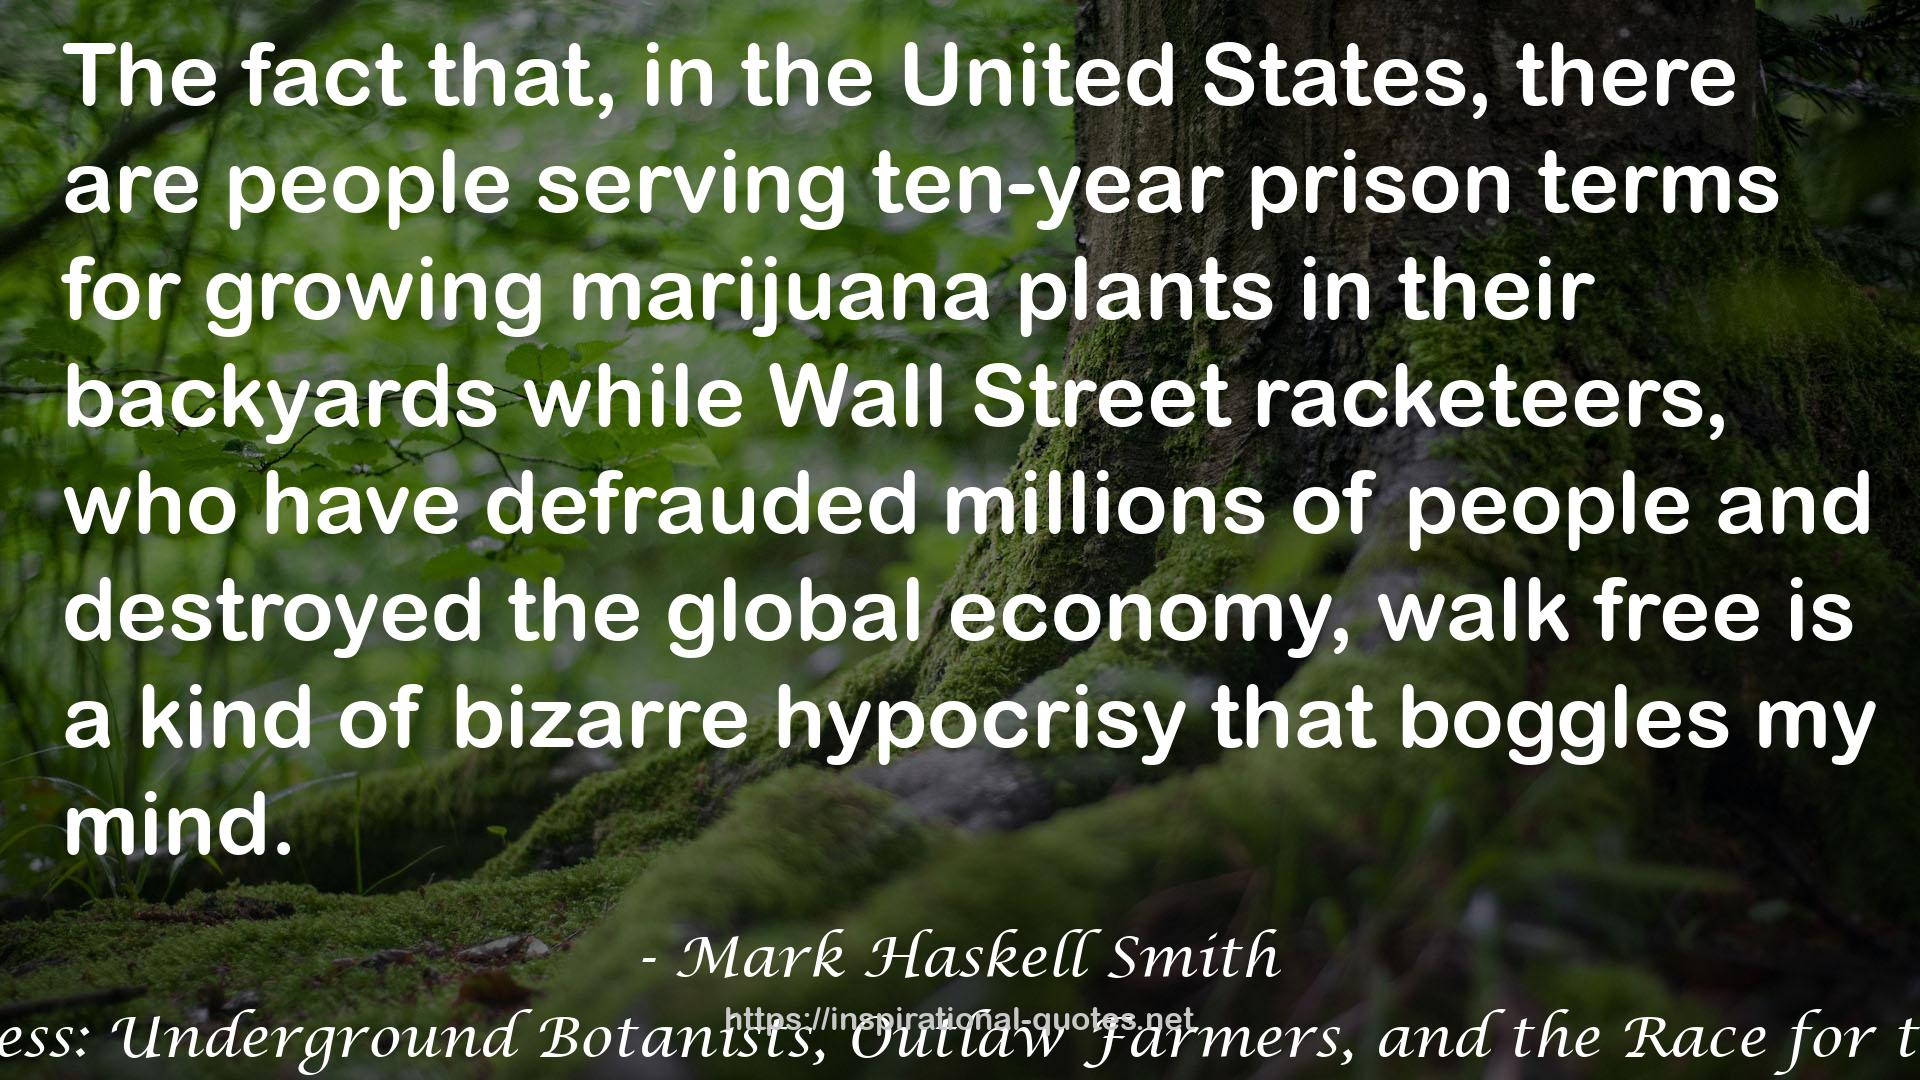 Mark Haskell Smith QUOTES